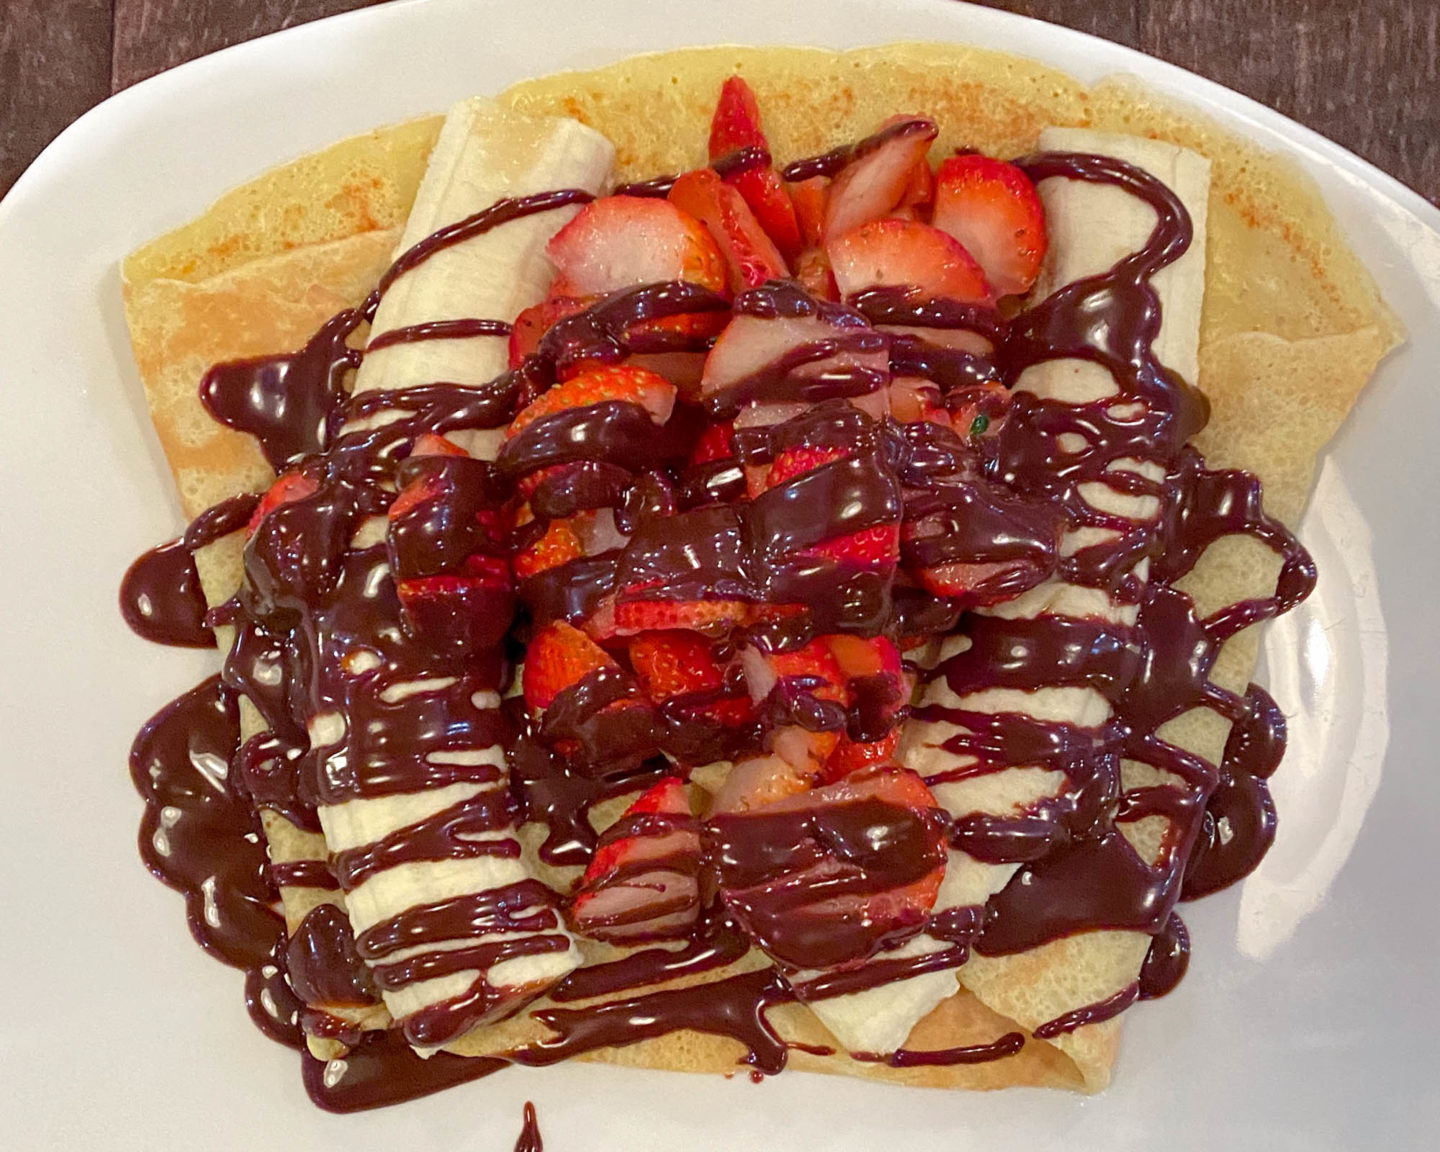 The most delicious strawberry banana nutella crepe in Mont Tremblant